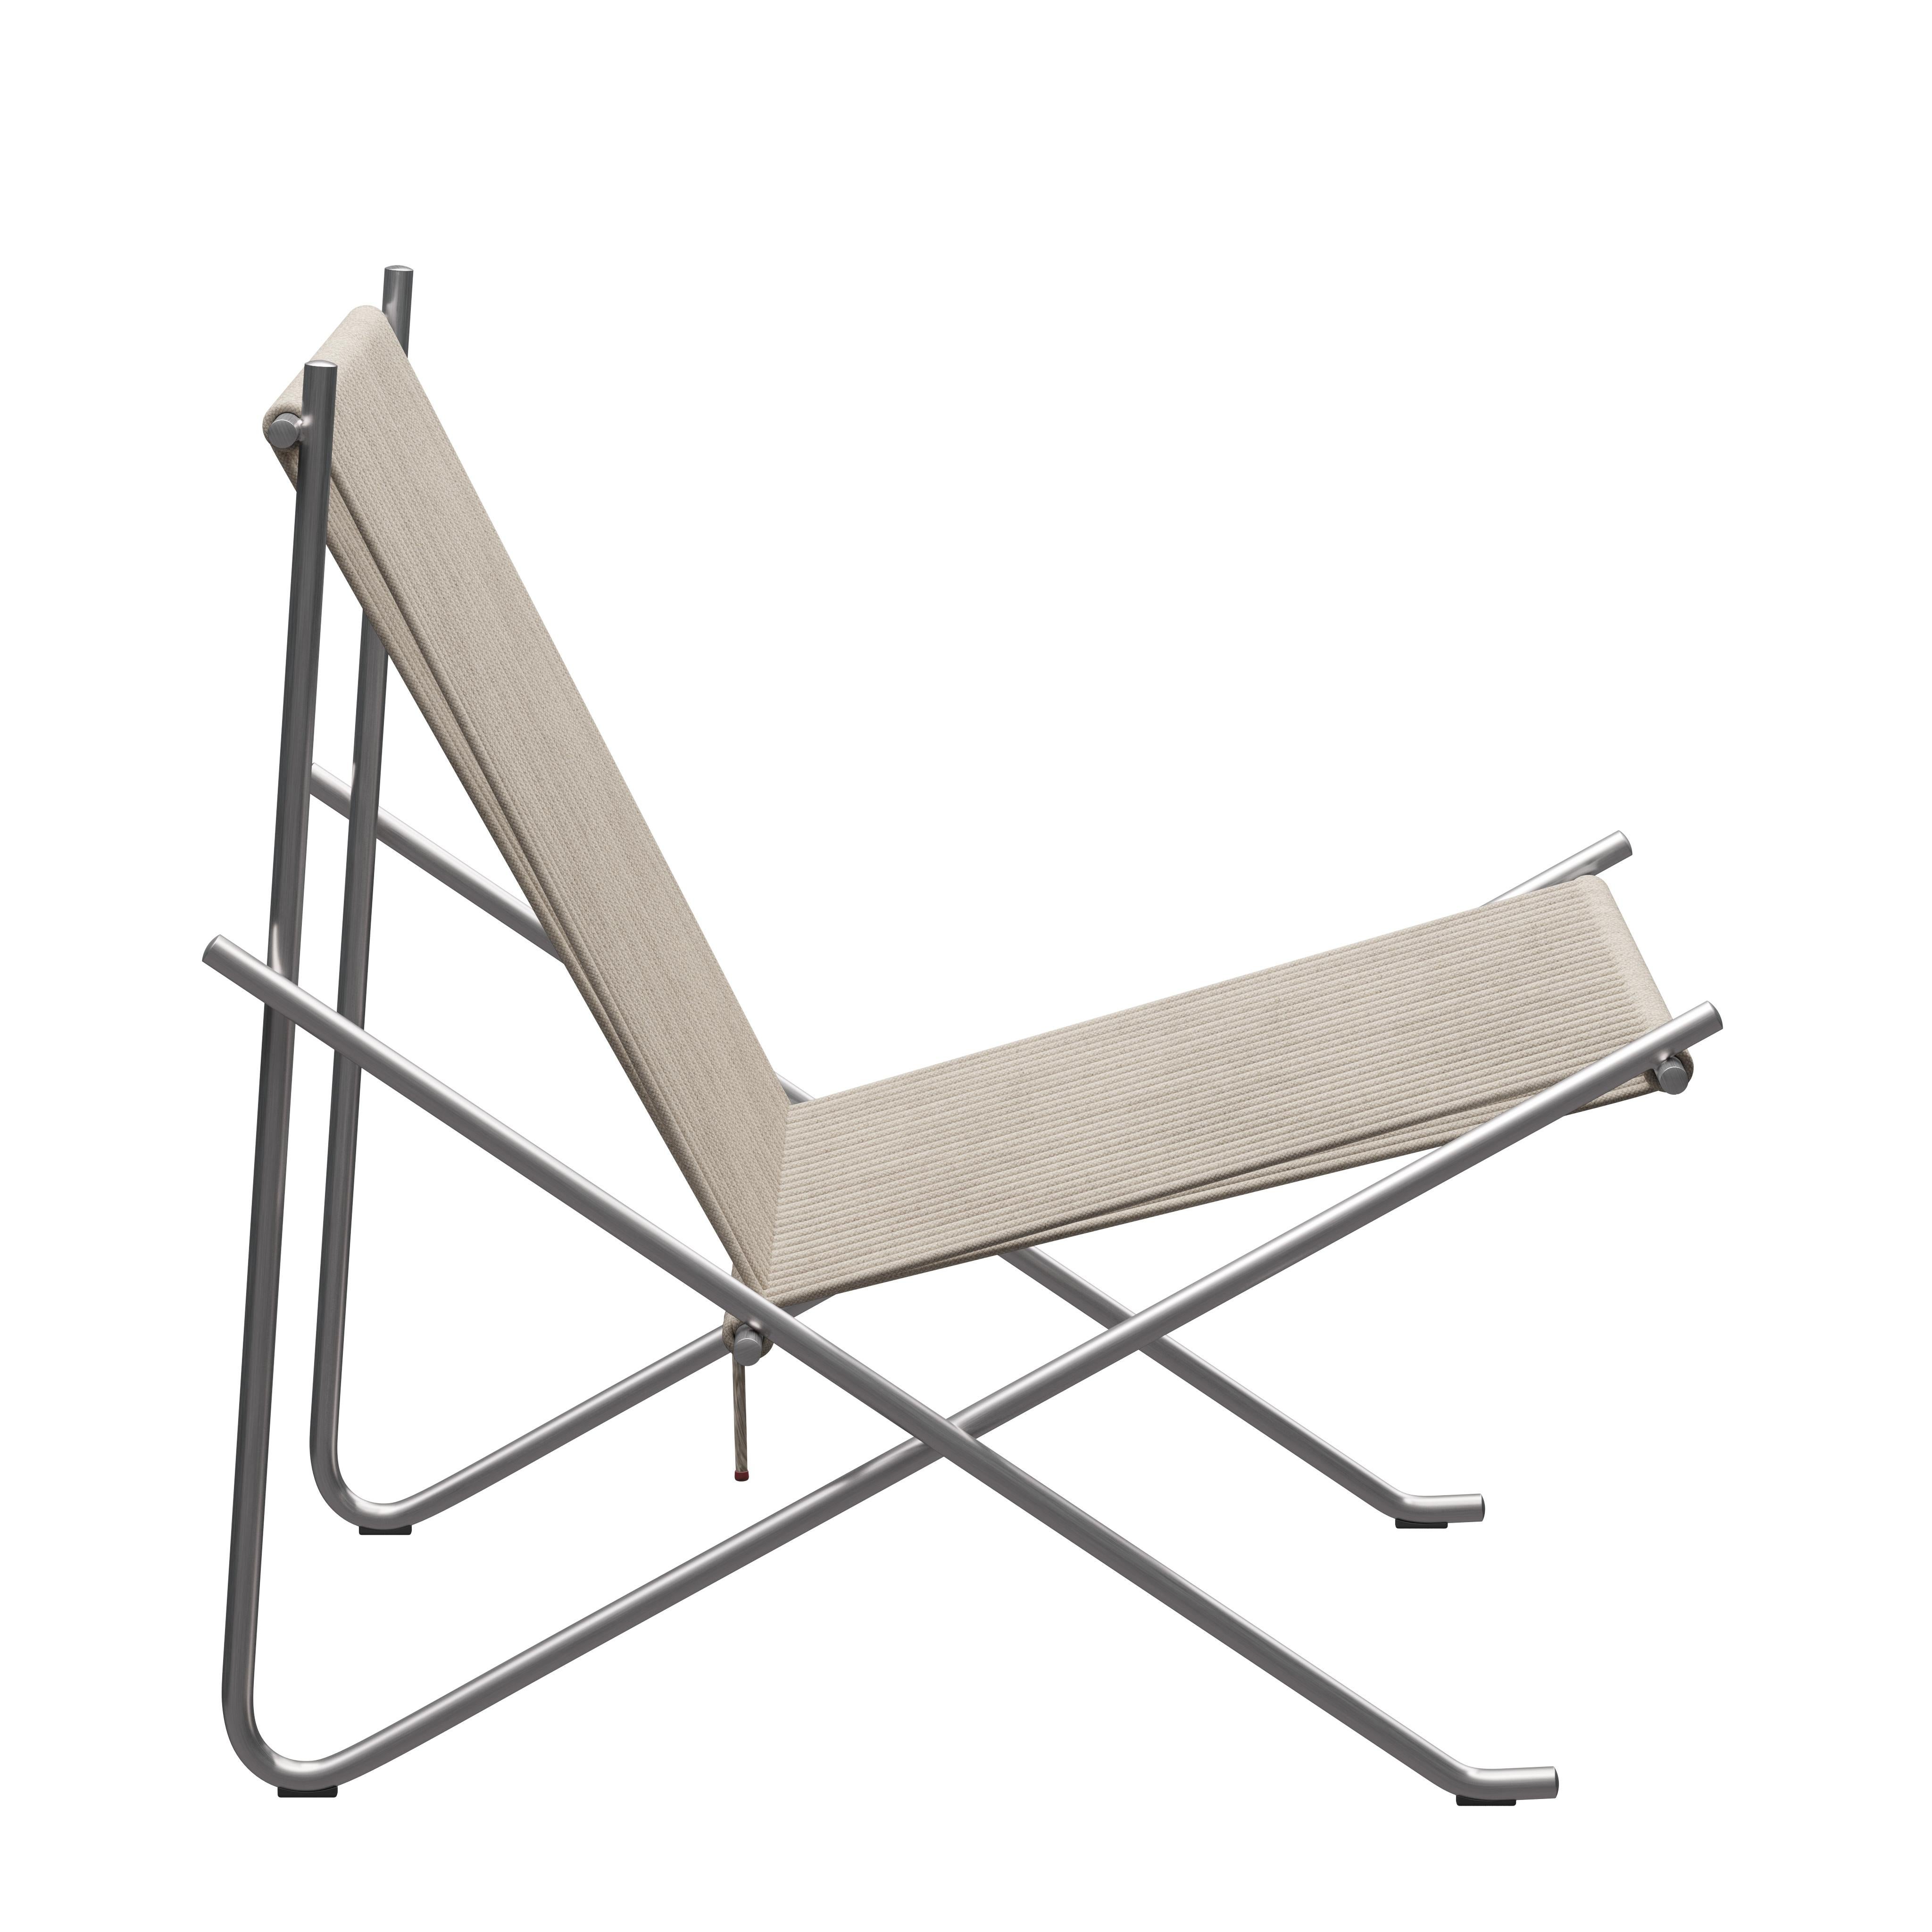 'PK4' Lounge Chair for Fritz Hansen in Natural Flag Halyard with Steel Frame.

Established in 1872, Fritz Hansen has become synonymous with legendary Danish design. Combining timeless craftsmanship with an emphasis on sustainability, the brand’s